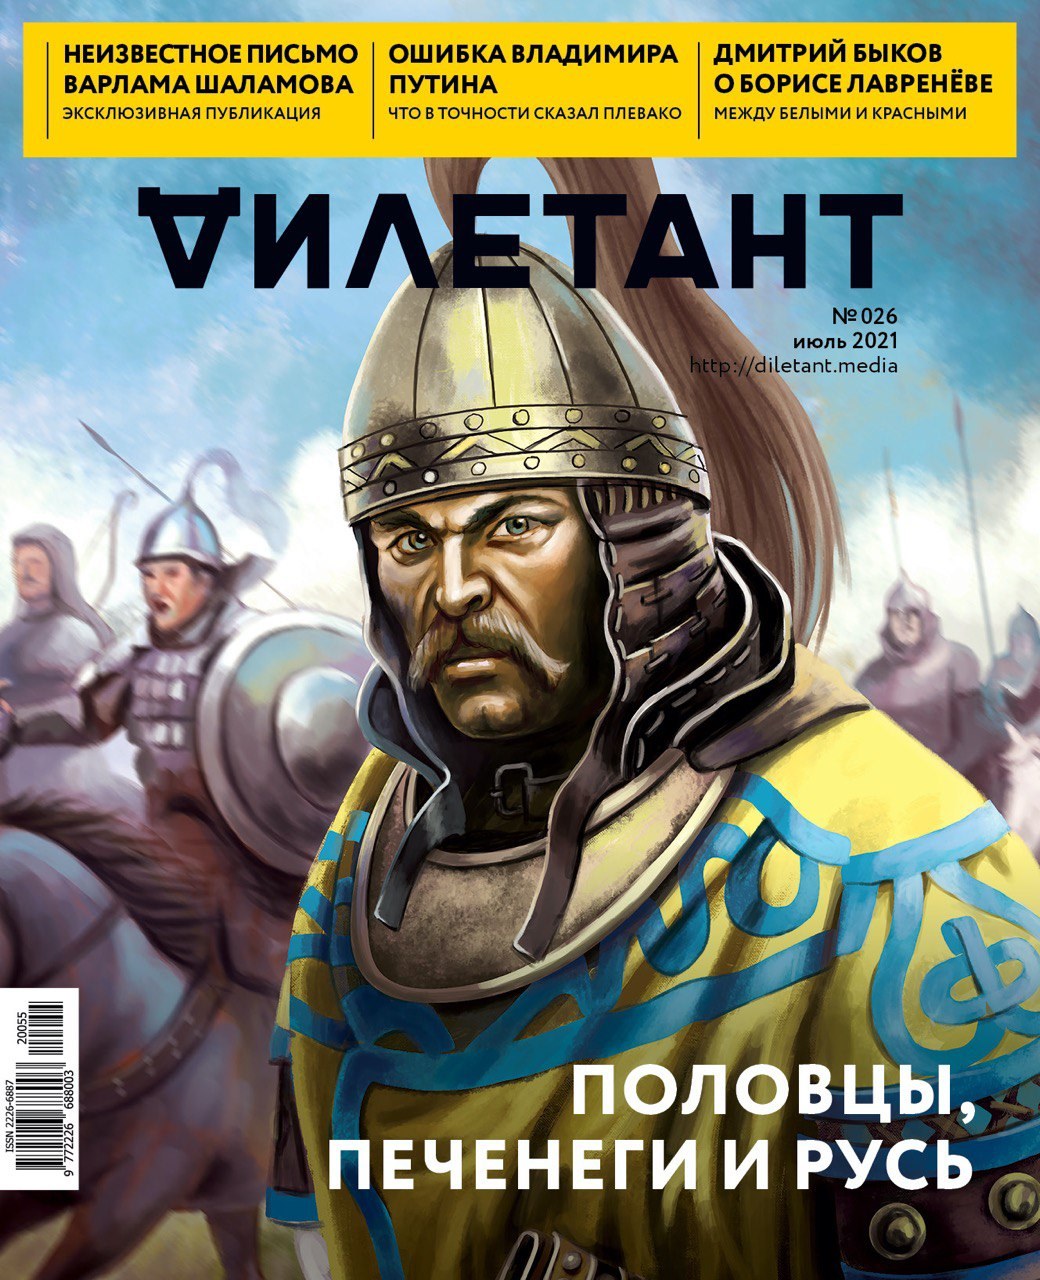 Our illustrations in the russian Diletant Magazine